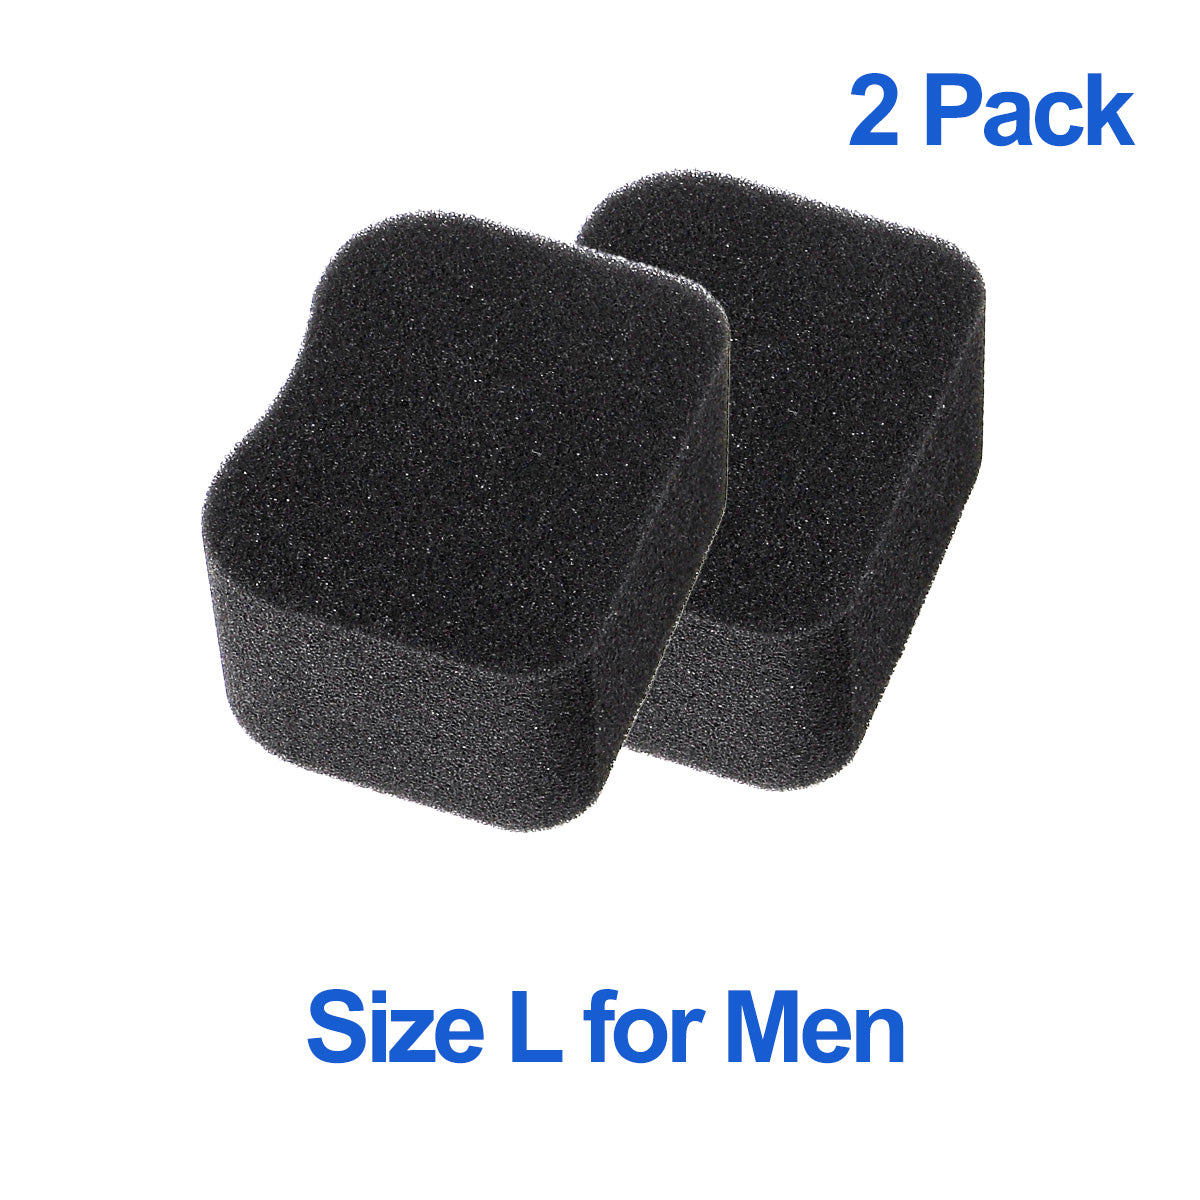 Watch Pillow 2 Pack for Watch Winder Smith